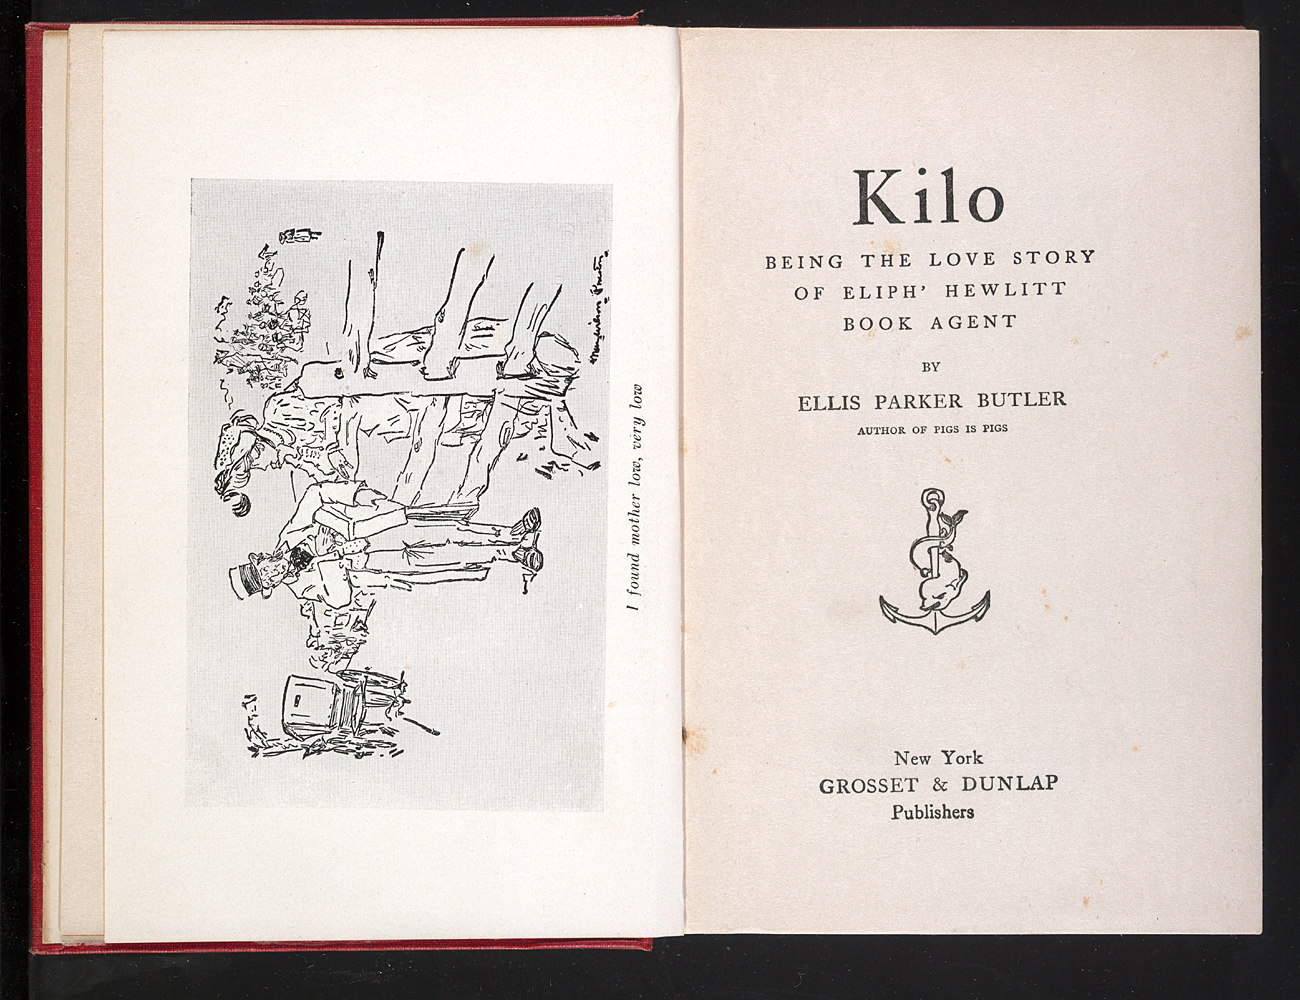 Kilo: Being the Love Story of Eliph' Hewlitt Book Agent interior cover illustration a salesman flirts with a woman by a fence